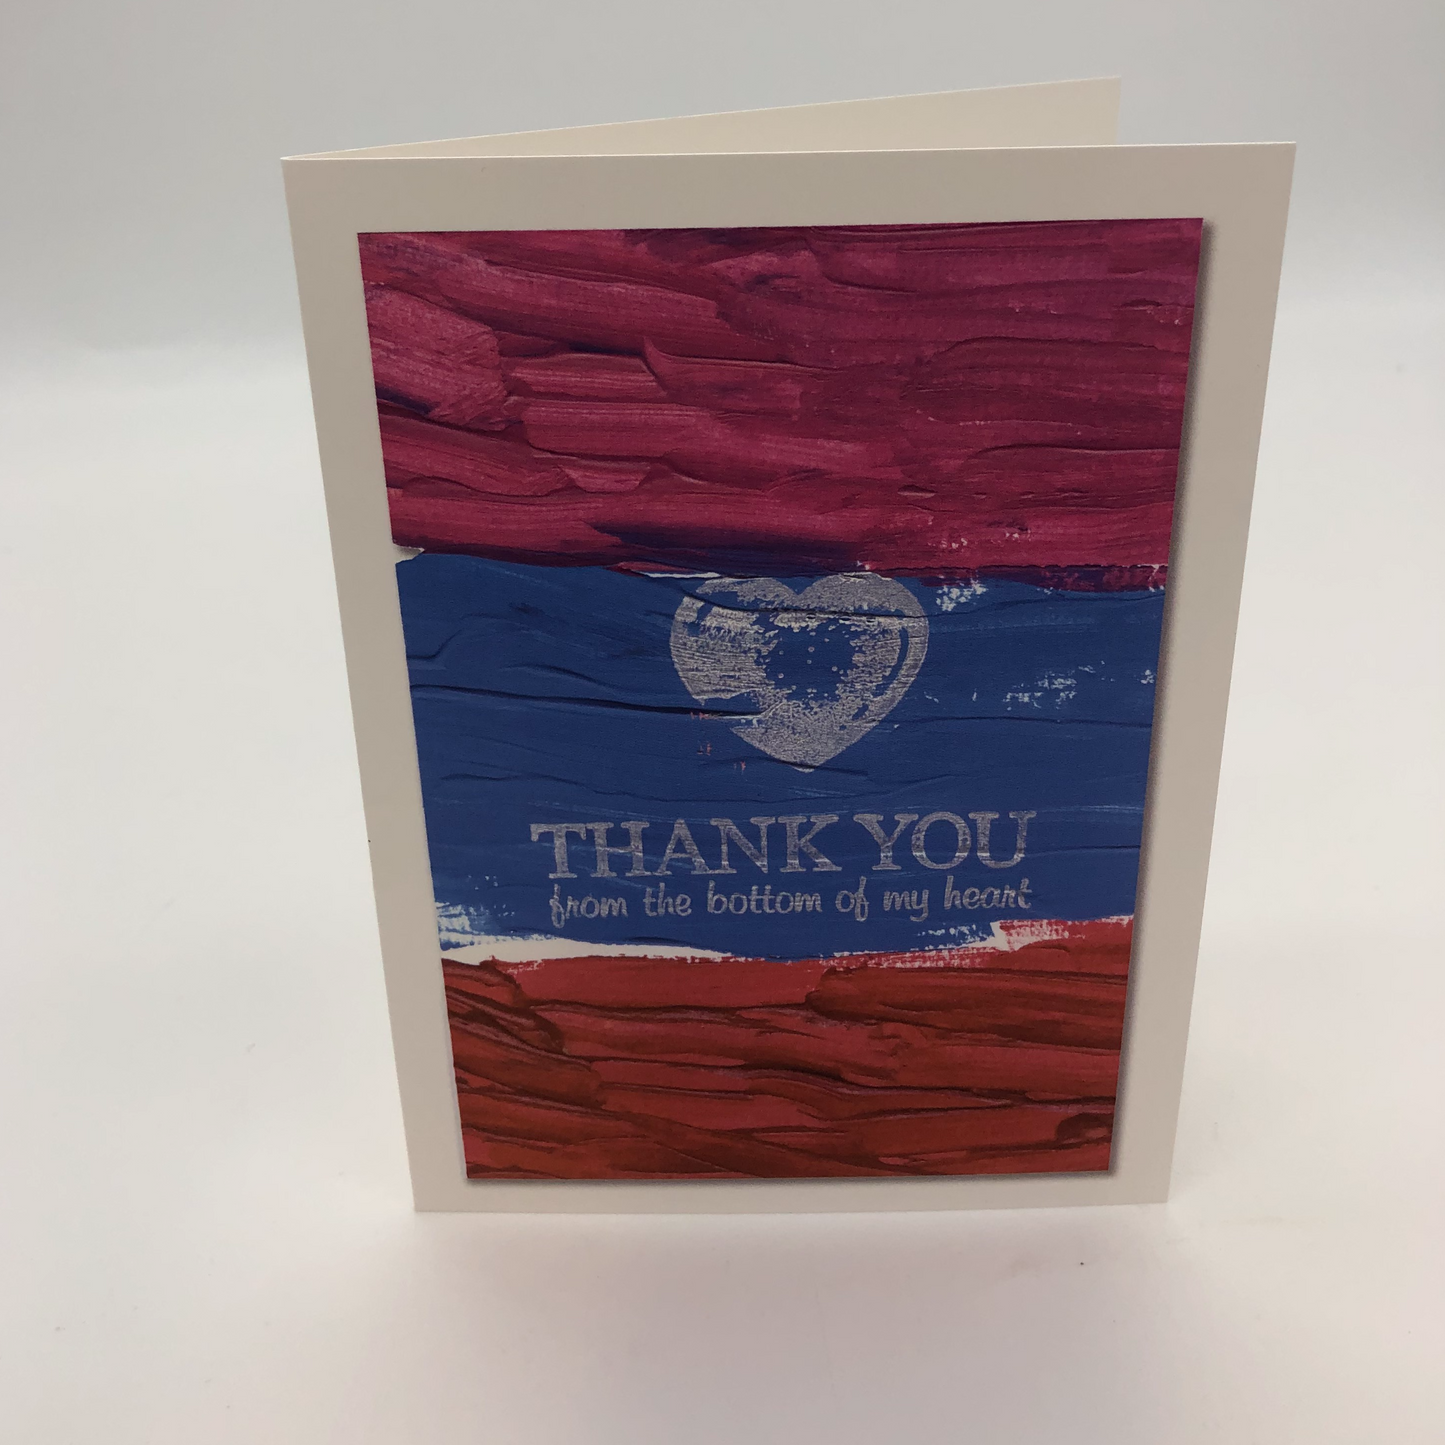 Print of an acrylic painting with stripes of three colors-maroon on top, bluish purple in the middle and red on bottom. Over the top is a white stamp of a heart and the words Thank you from the bottom of our heart.